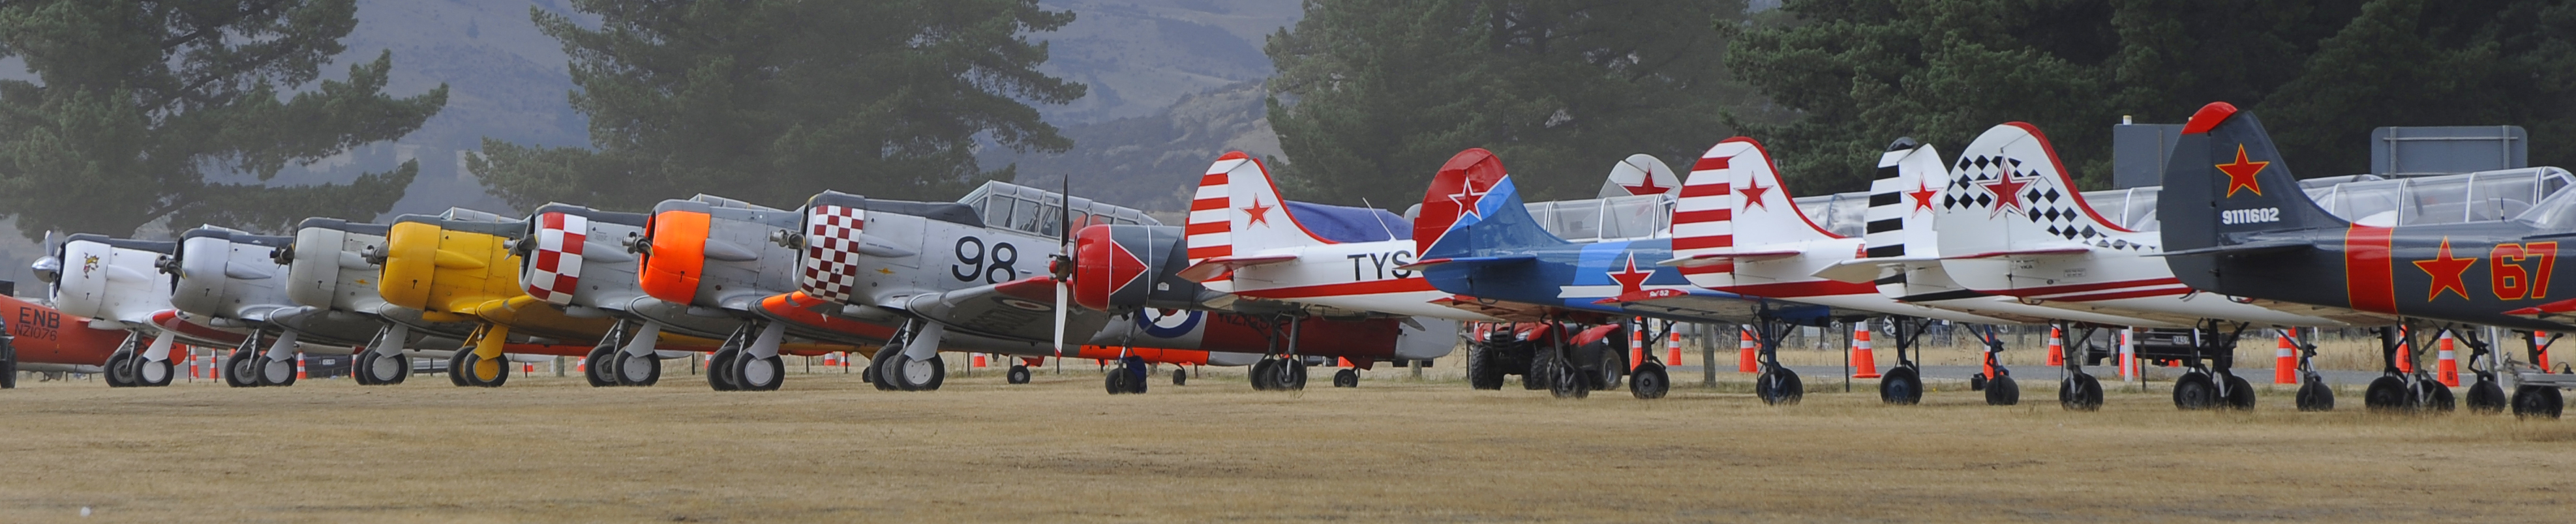 A line up on the Wanaka airshow flightline of T-6 Harvards and Yak-52s.